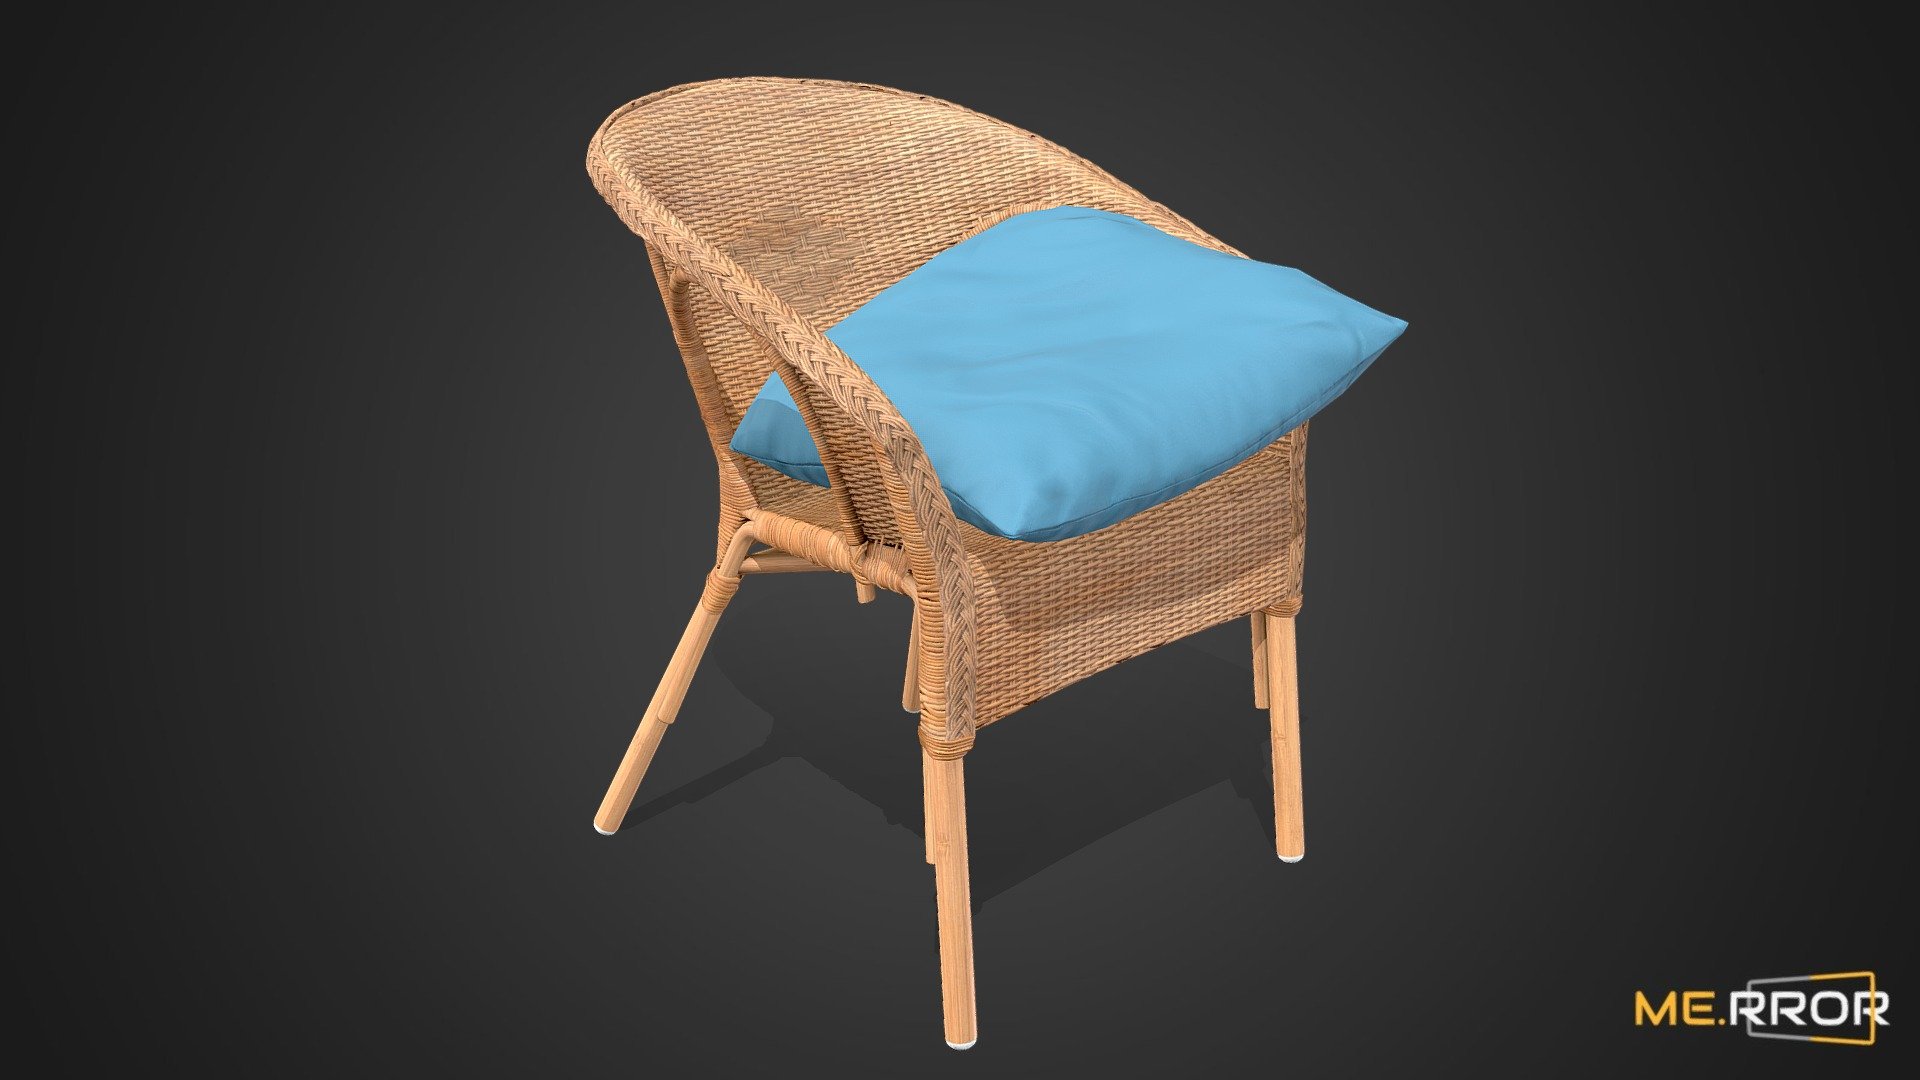 MERROR is a 3D Content PLATFORM which introduces various Asian assets to the 3D world


3DScanning #Photogrametry #ME.RROR - [Game-Ready] Rattan Chair and Cushion - Buy Royalty Free 3D model by ME.RROR Studio (@merror) 3d model